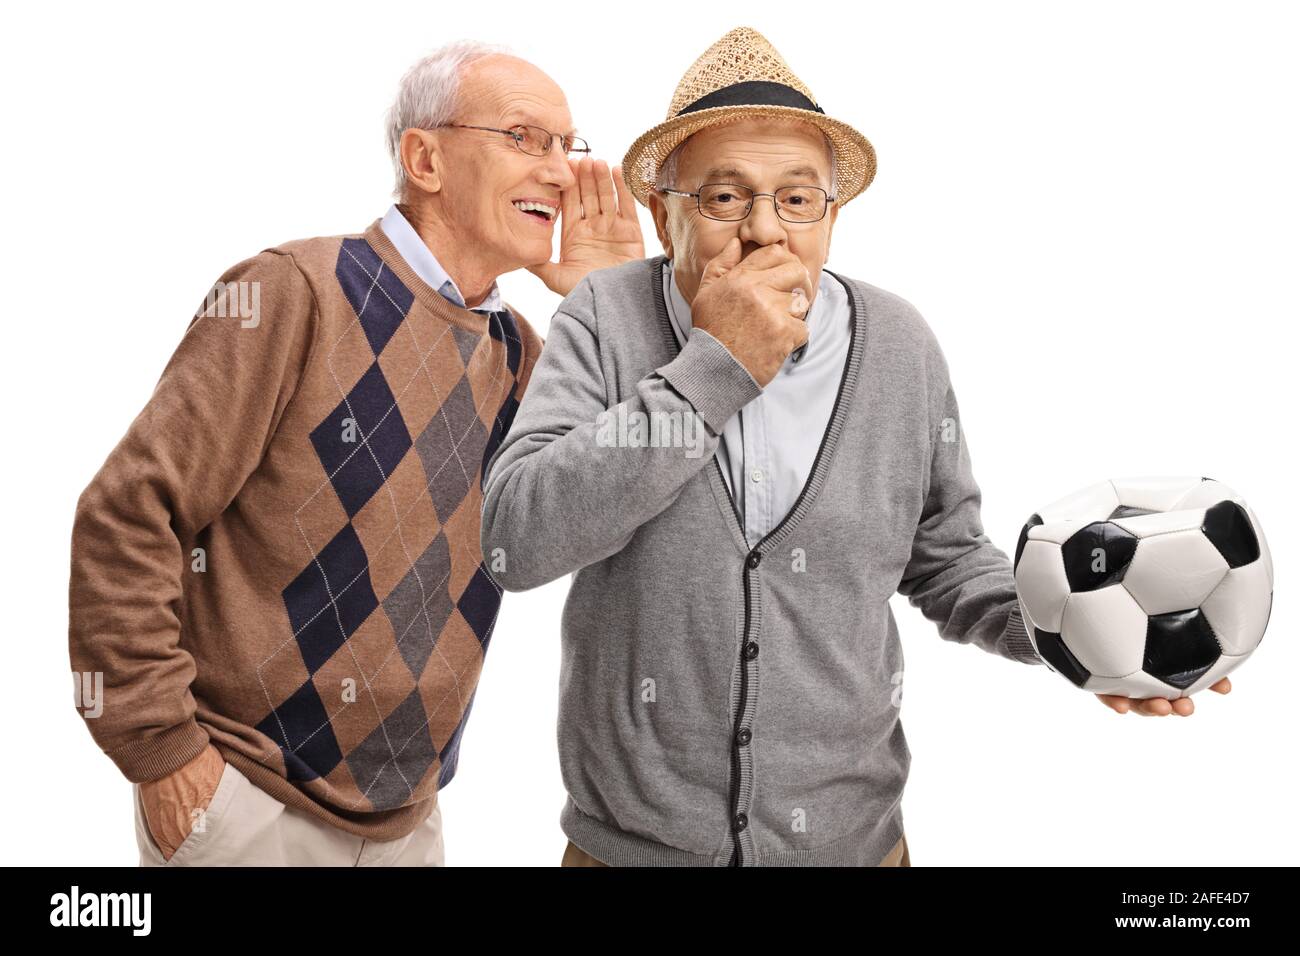 Senior man whispering to friend holding a deflated soccer ball and laughing isolated on white background Stock Photo